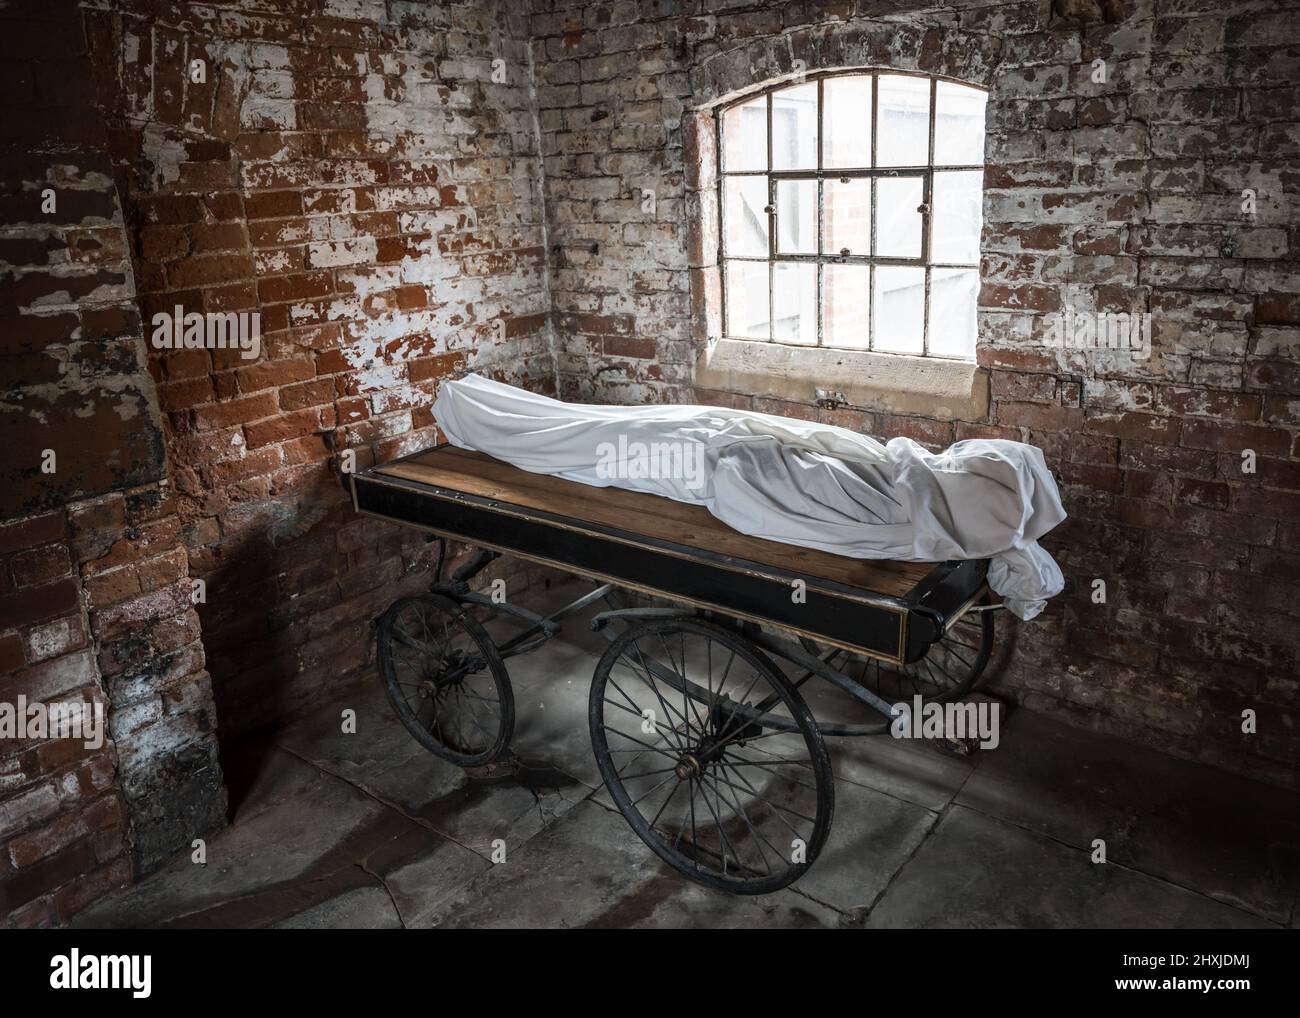 Dead body cadaver wrapped in white sheets on trolly bed ready for collection for autopsy then burial. Stock Photo